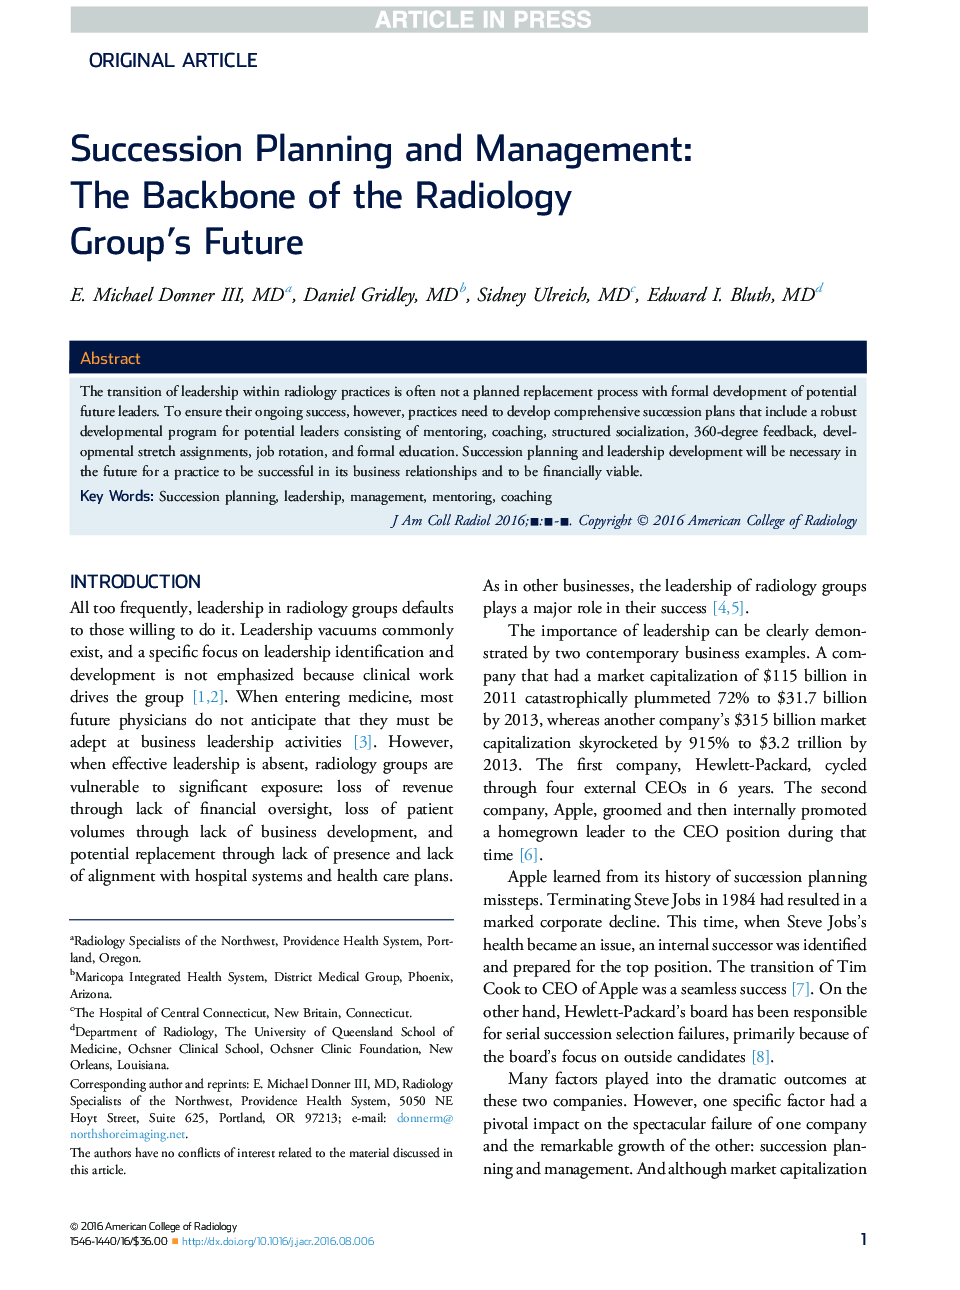 Succession Planning and Management: The Backbone of the Radiology Group'sÂ Future